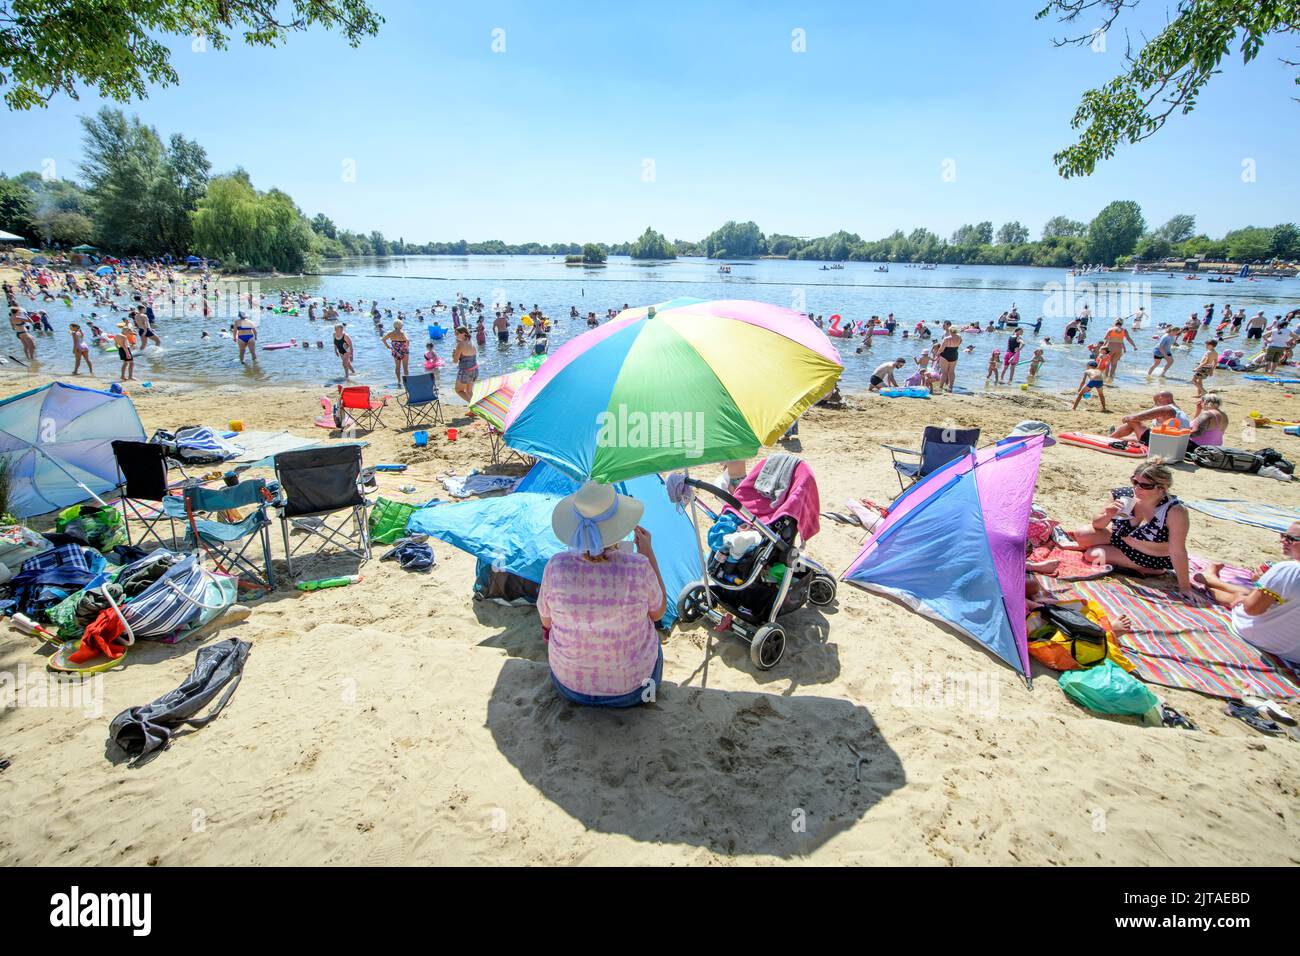 The Cotswold Water Park near Cirencester, Gloucestershire during the 2022 heatwave.holiday season Stock Photo